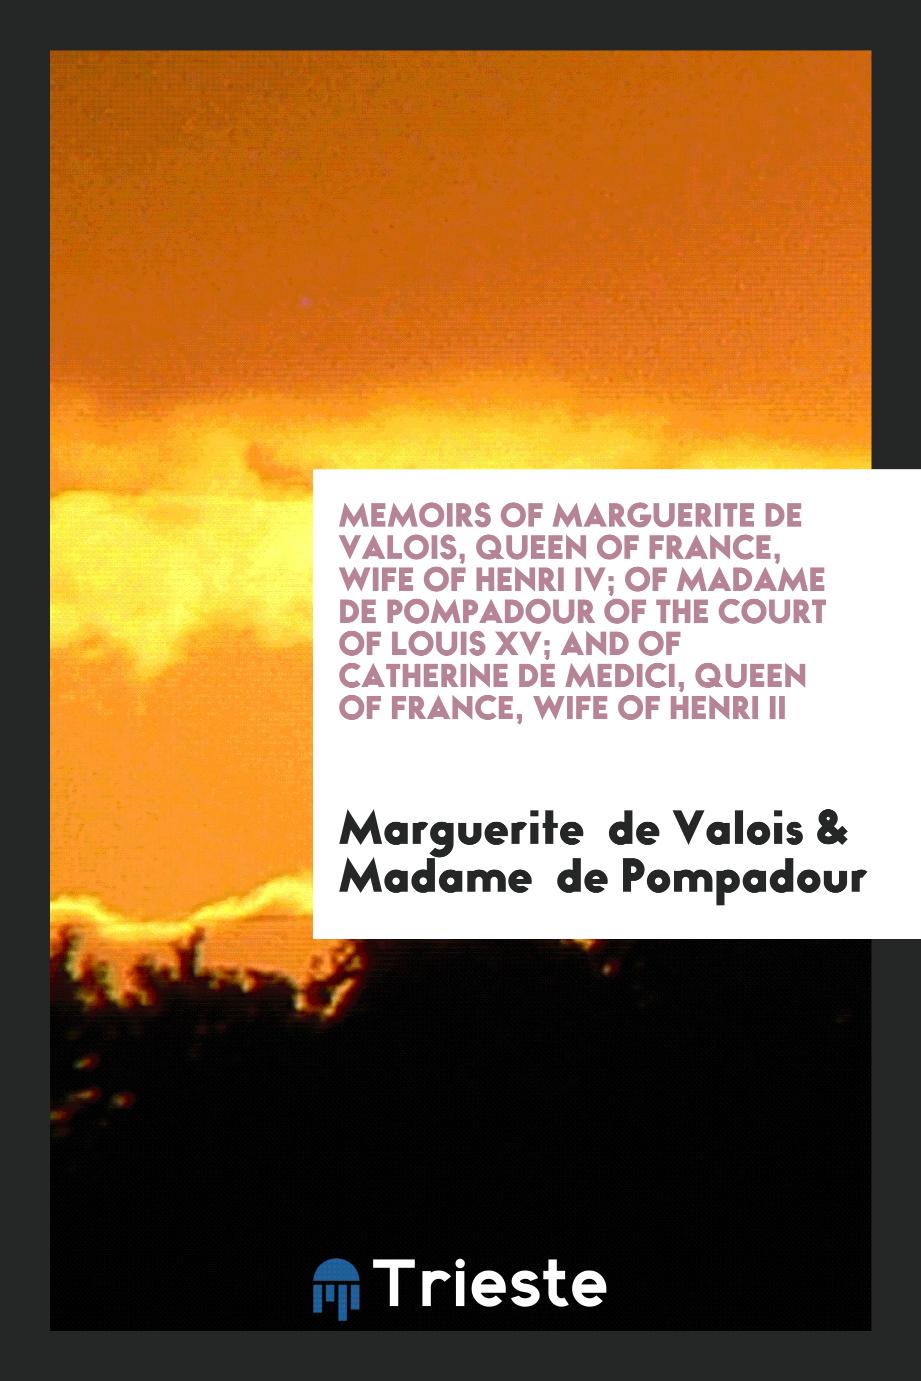 Memoirs of Marguerite de Valois, Queen of France, Wife of Henri IV; of Madame de Pompadour of the Court of Louis XV; and of Catherine de Medici, Queen of France, Wife of Henri II